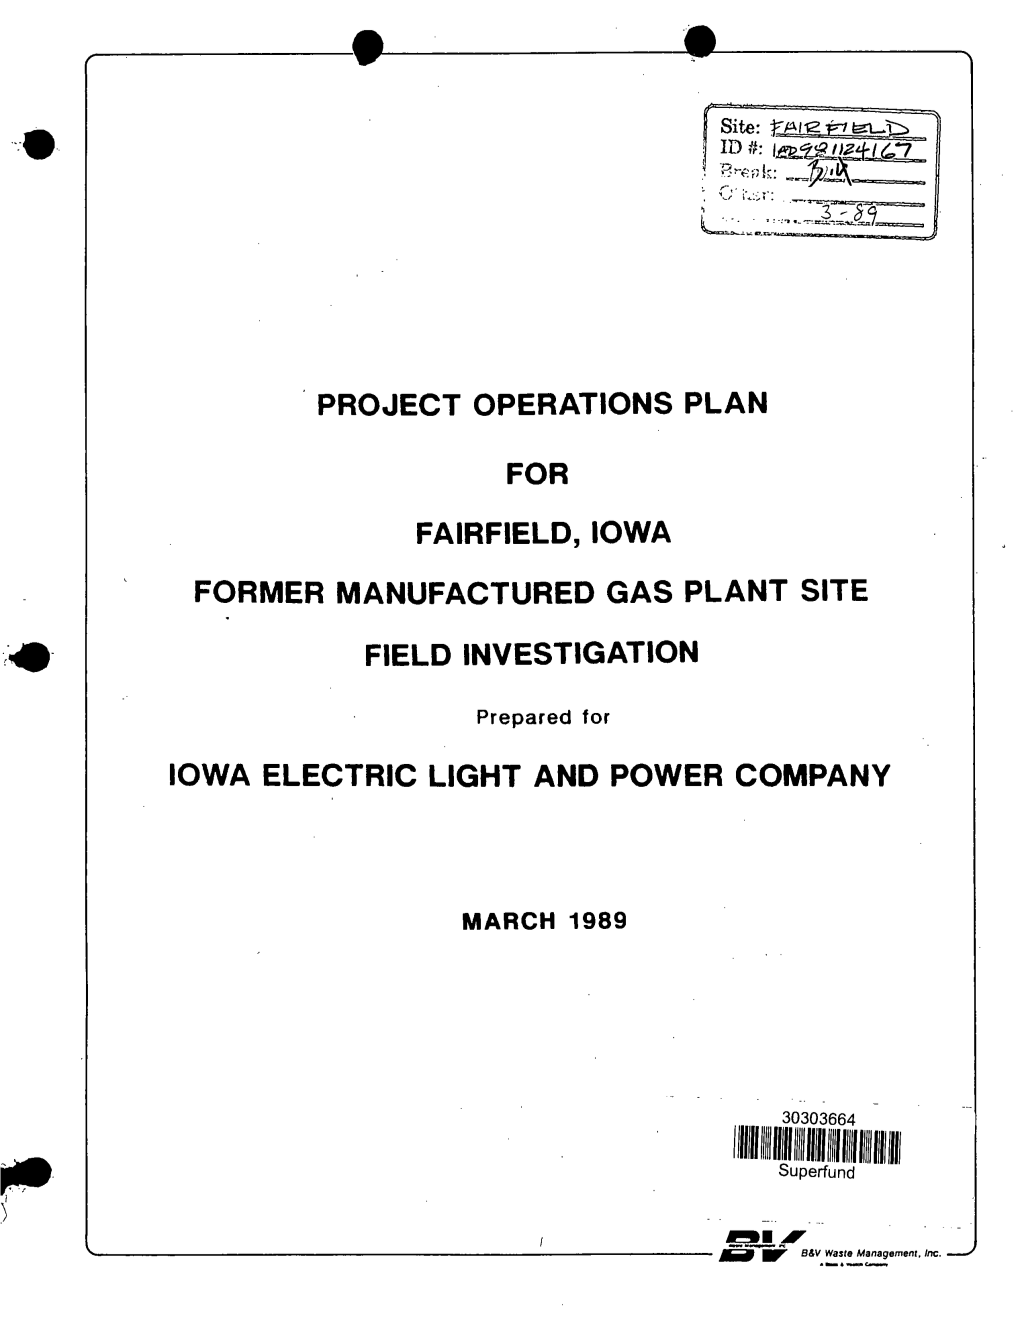 Project Operations Plan for Fairfield, Iowa Former Manufactured Gas